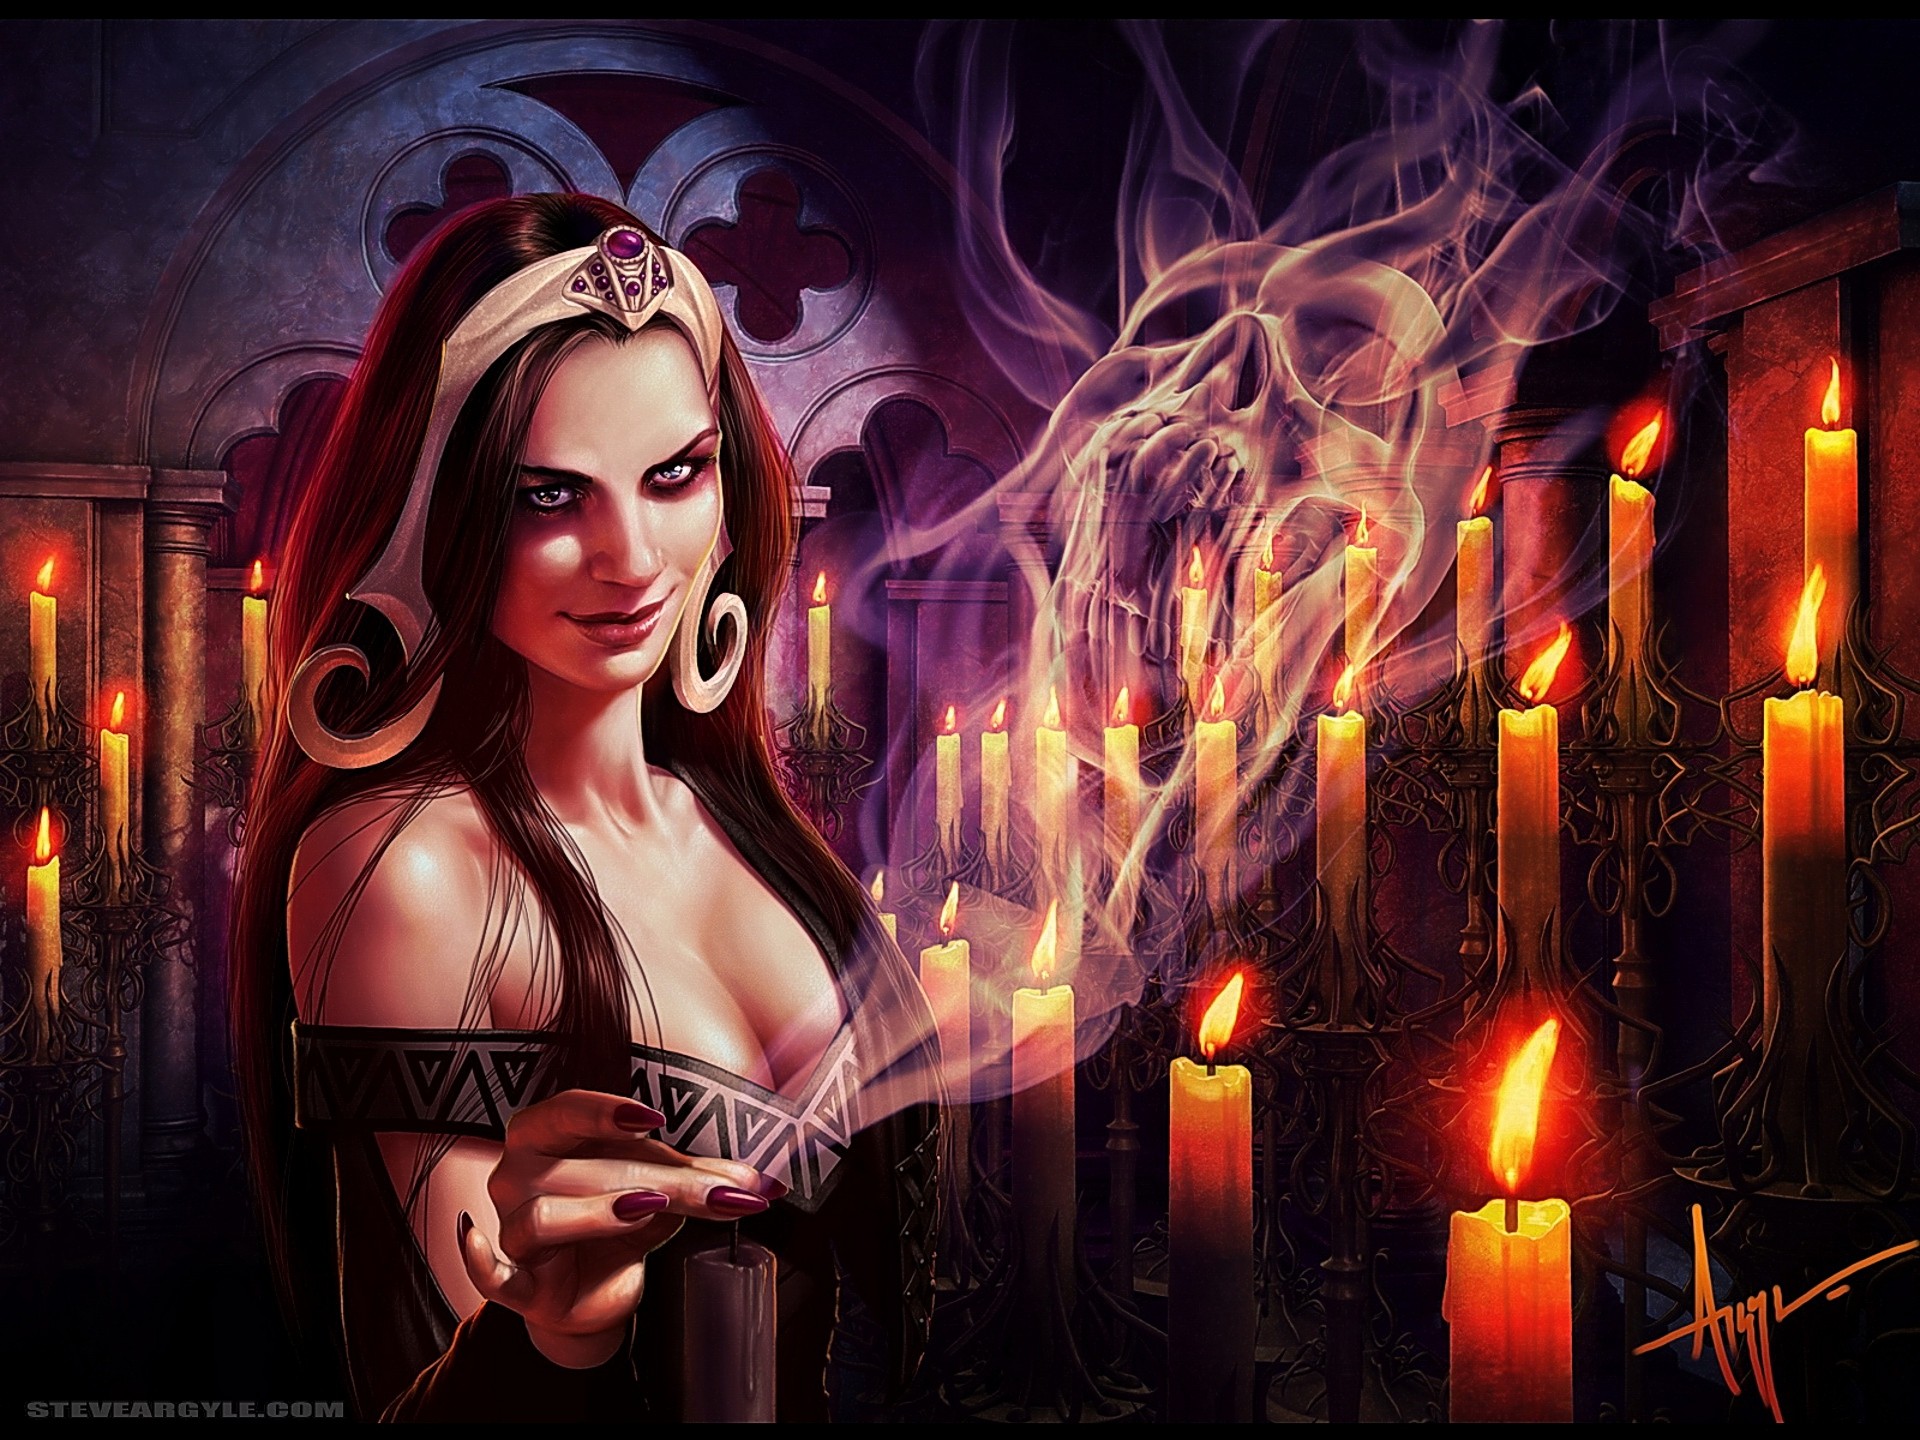 liliana wallpaper,cg artwork,darkness,photography,animation,goth subculture